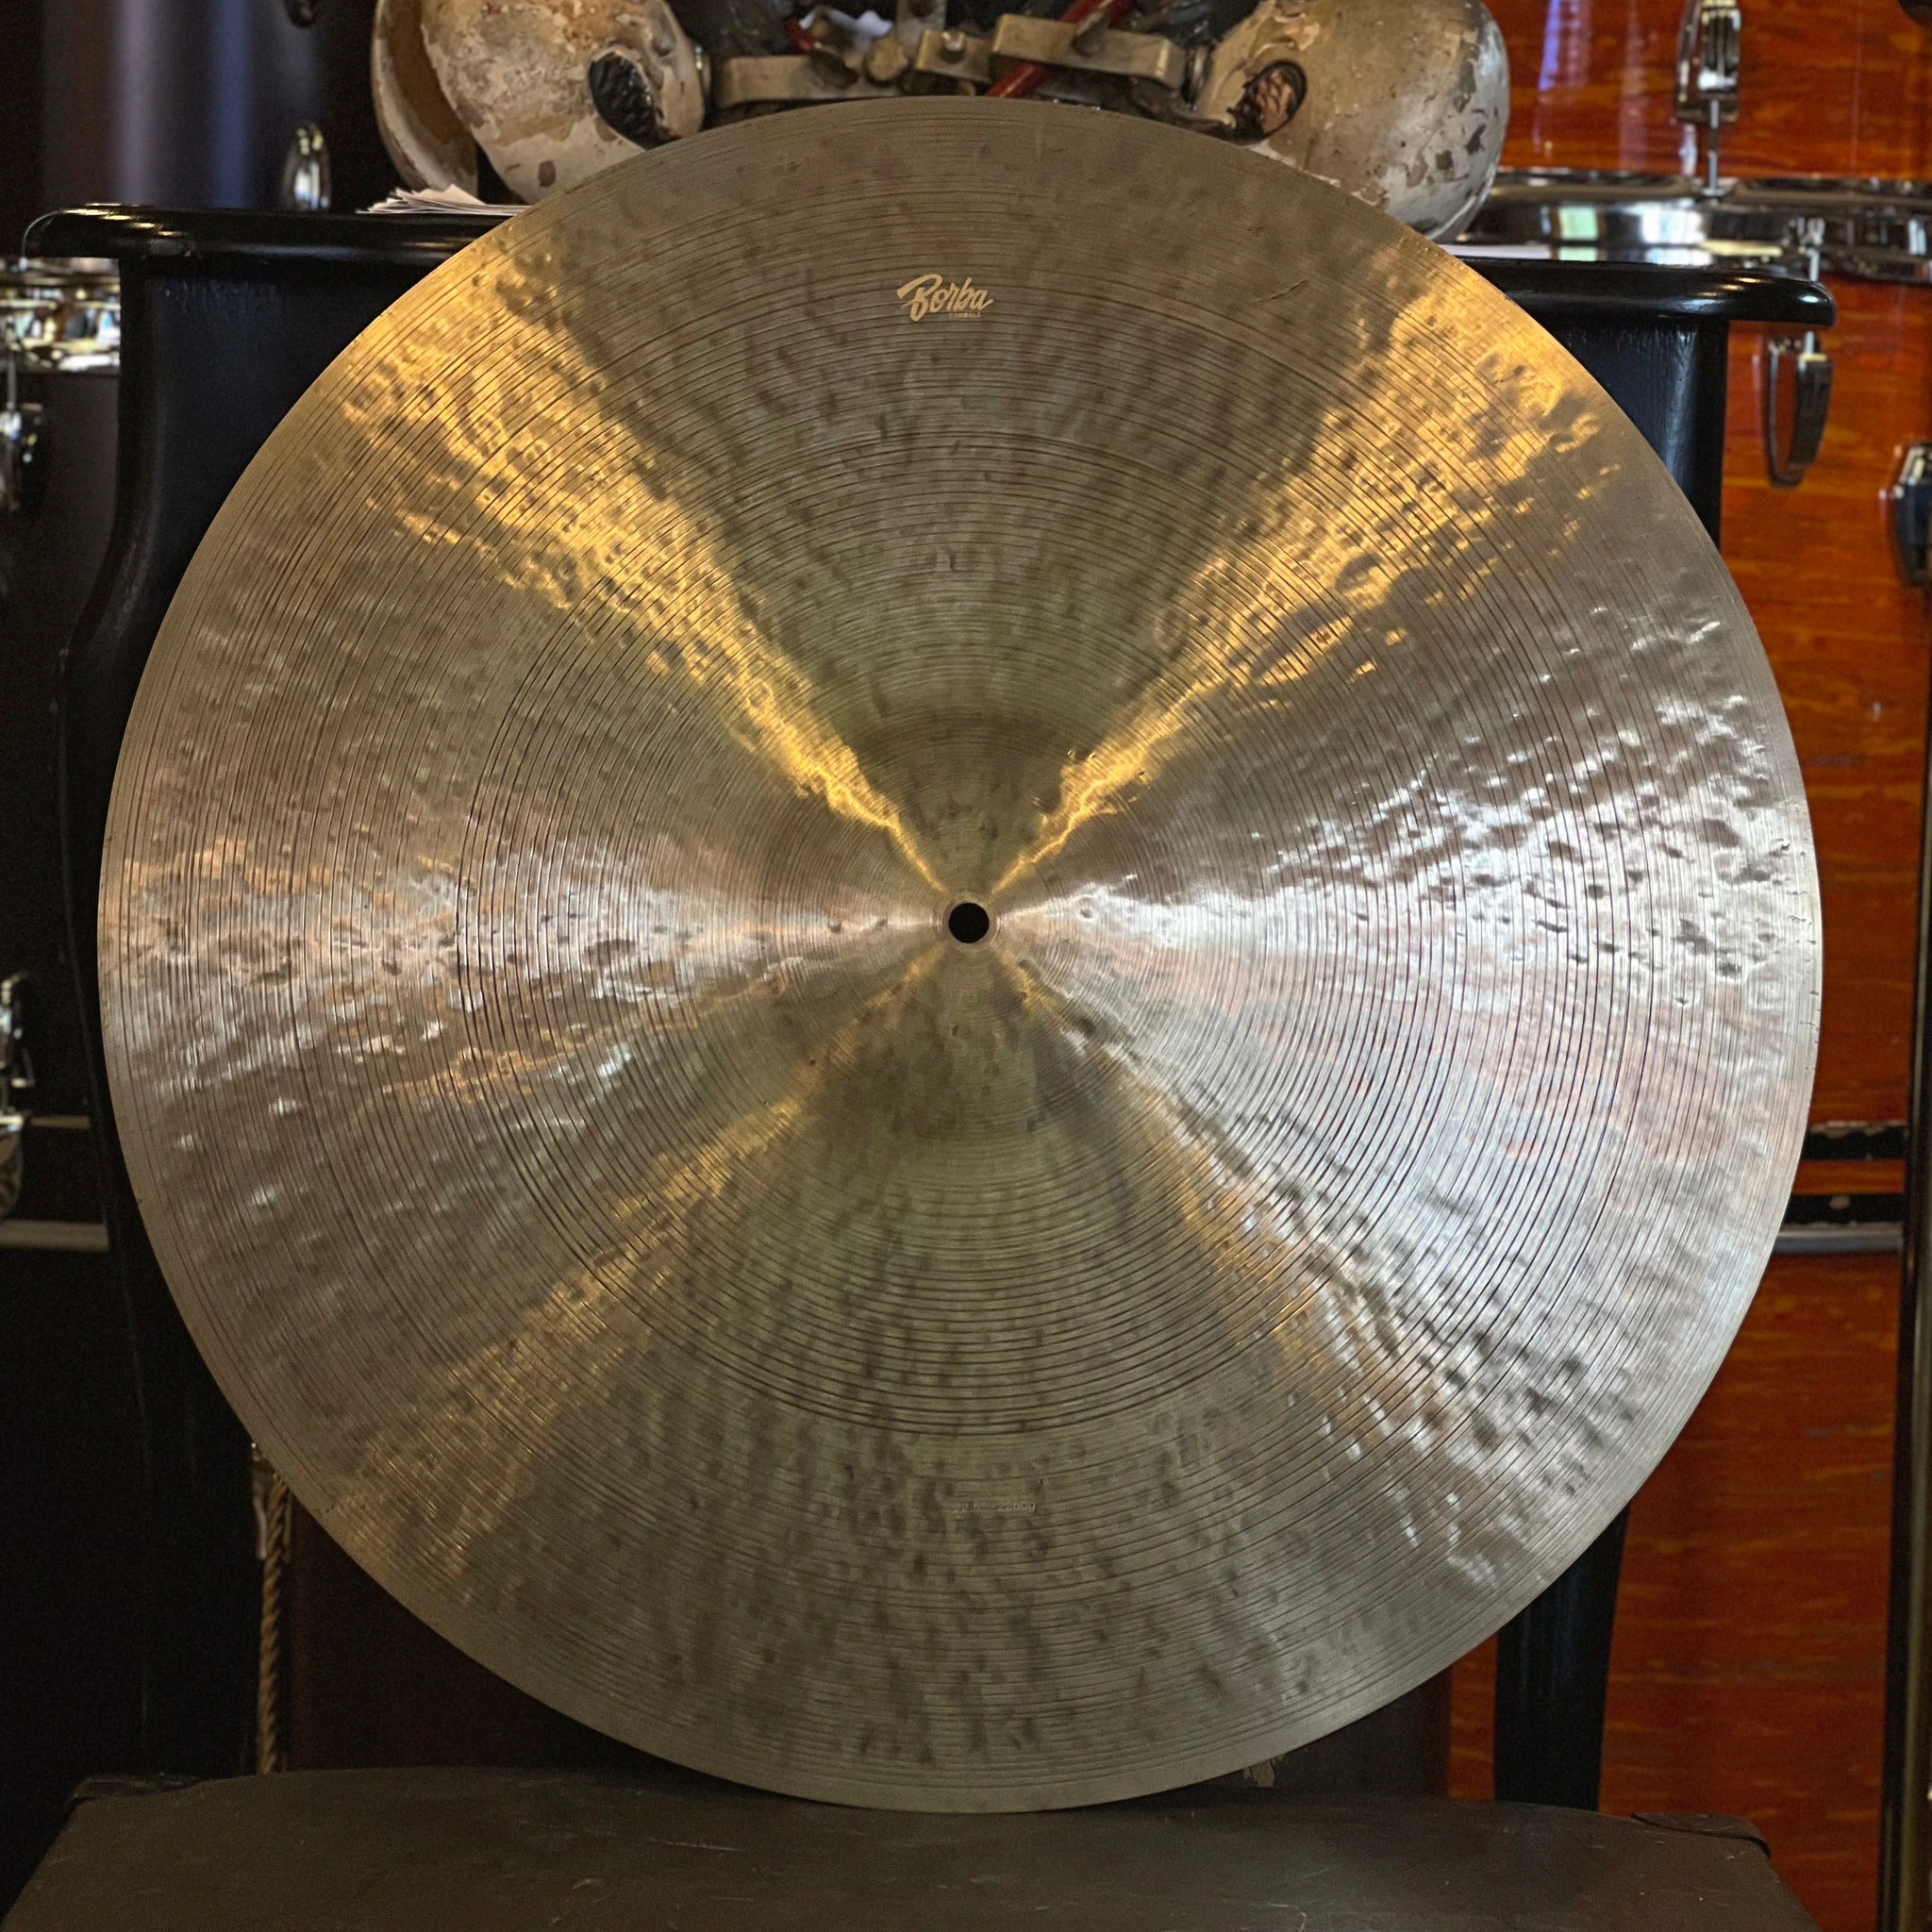 NEW Borba 22.5" Hand Hammered Ride Cymbal - 2260g